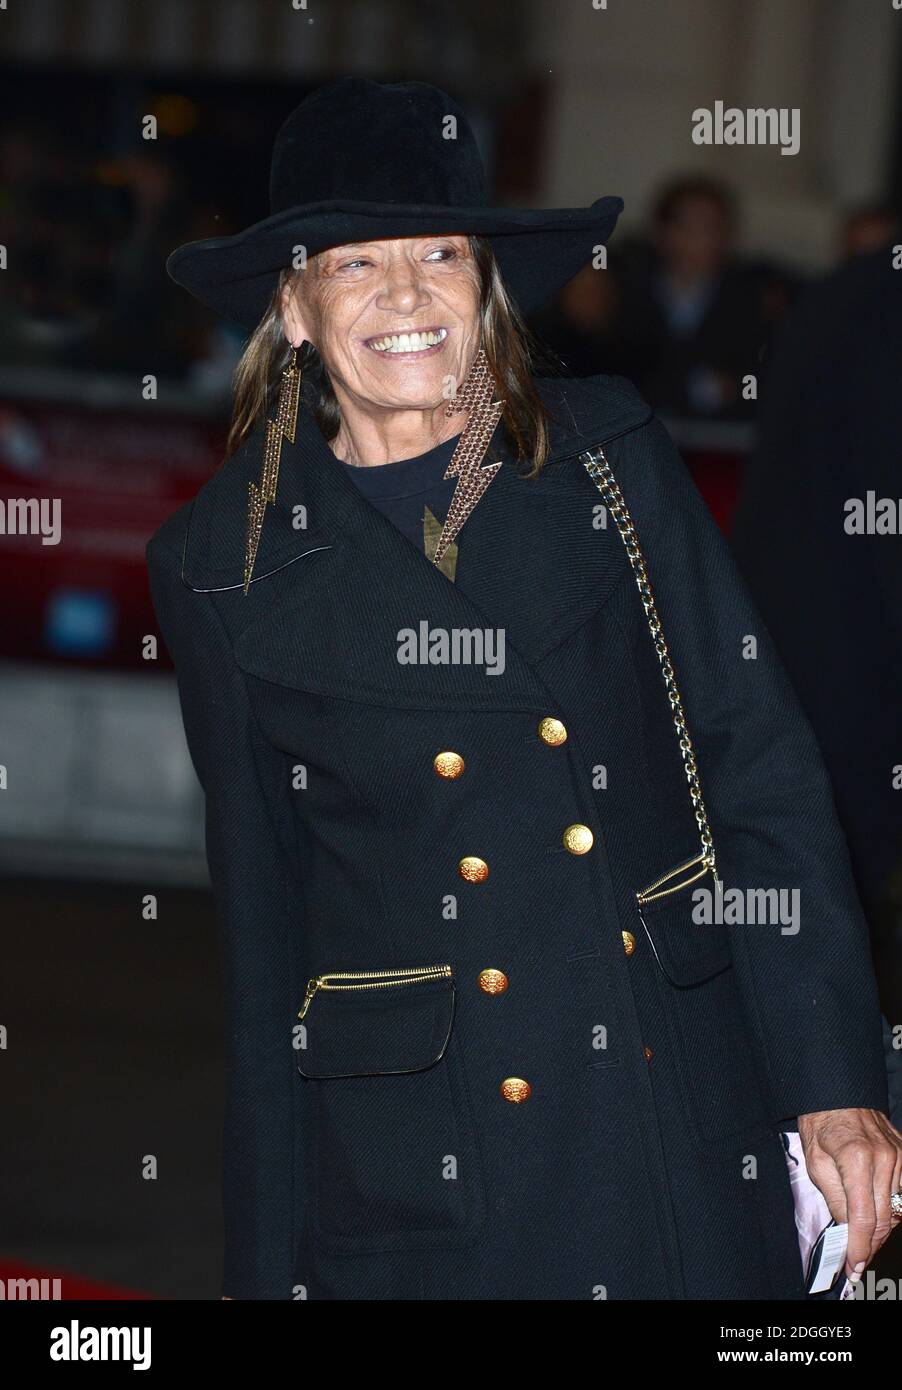 Anita Pallenberg arriving at the 56th BFI London Film Festival Gala Screening of Crossfire Hurricanes, Odeon Cinema, Leicester Square, London.   Stock Photo